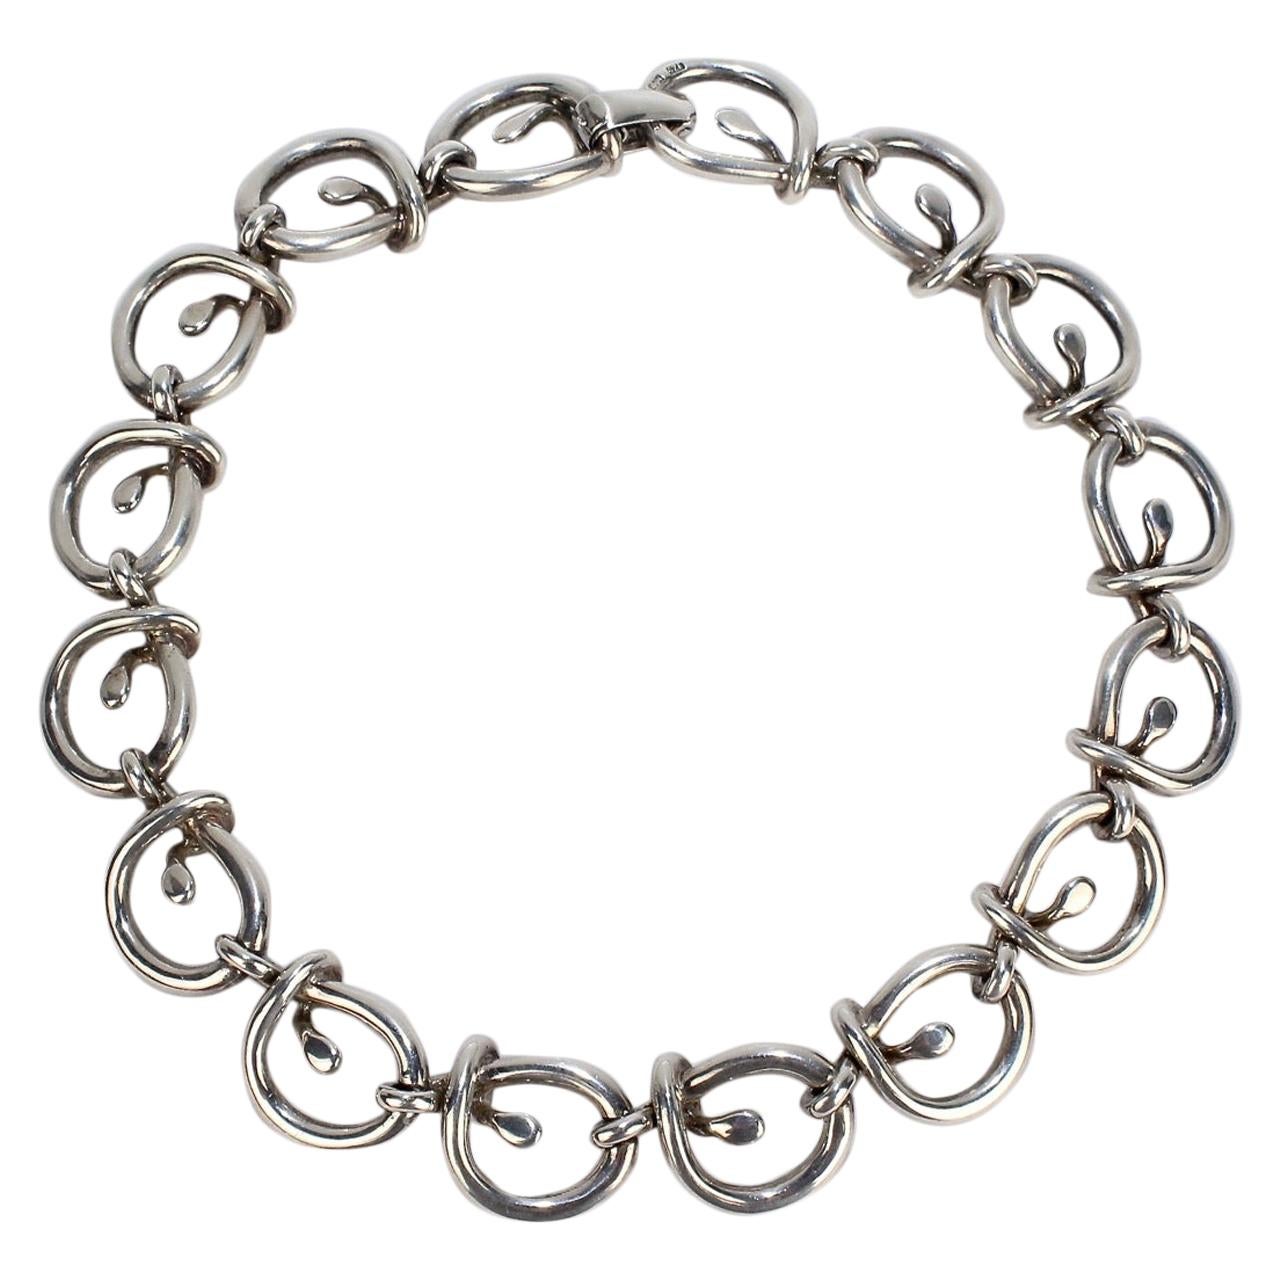 Heavy Link Vintage Mexican Sterling Silver Dog Collar Choker Necklace by Tane